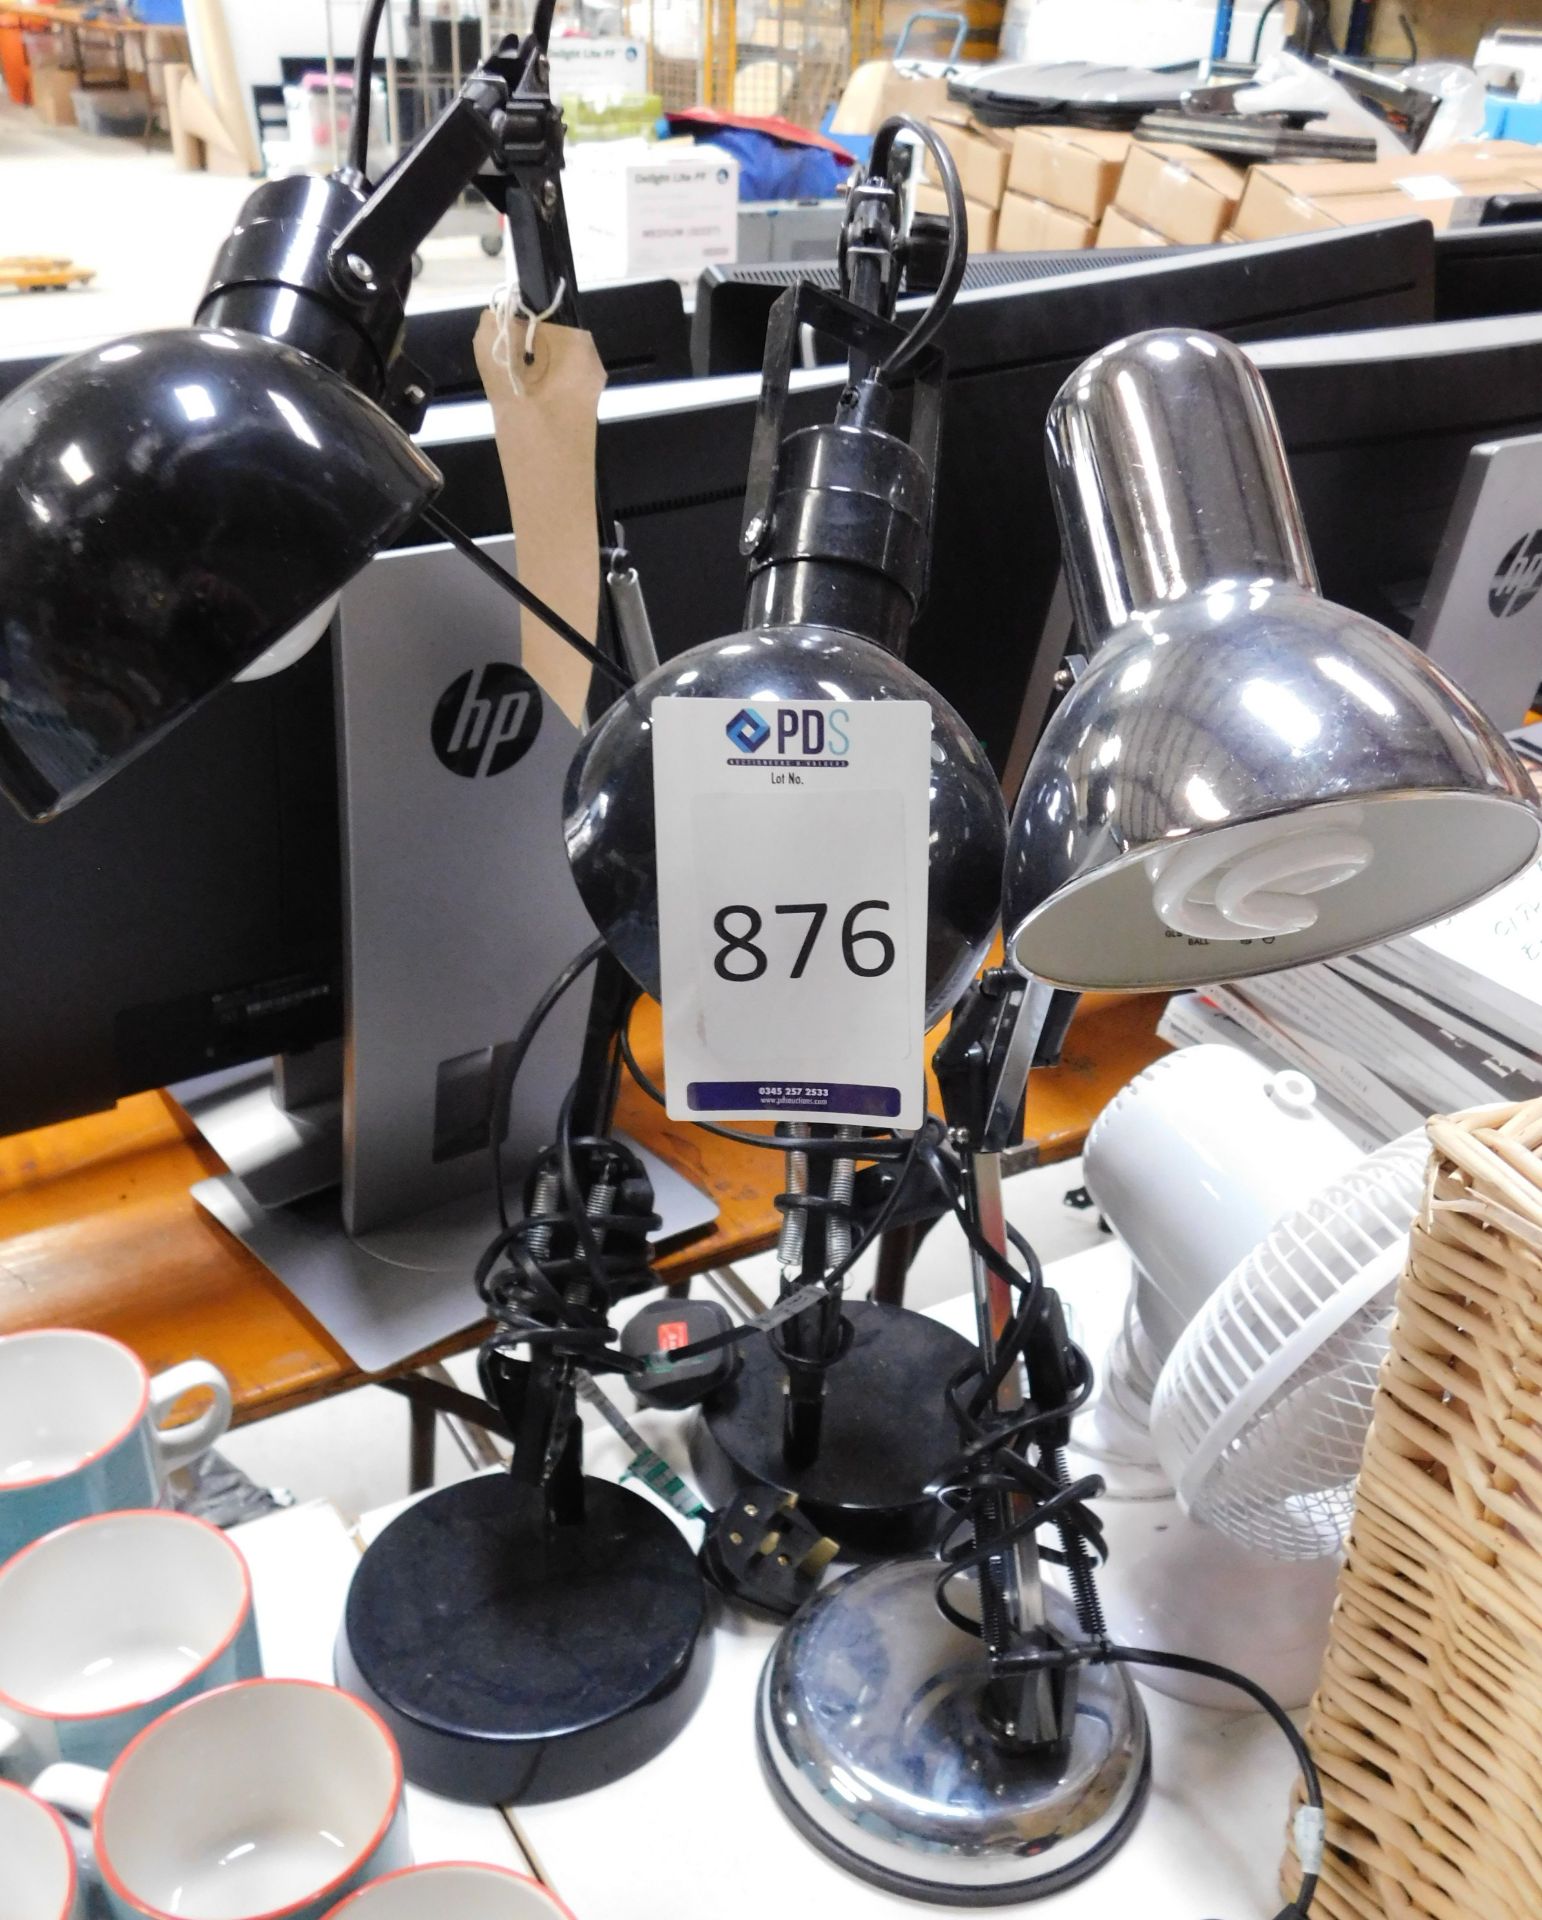 3 Angle Poise Desk Lamps & Small Desk Fan (Location Brentwood. Please Refer to General Notes)